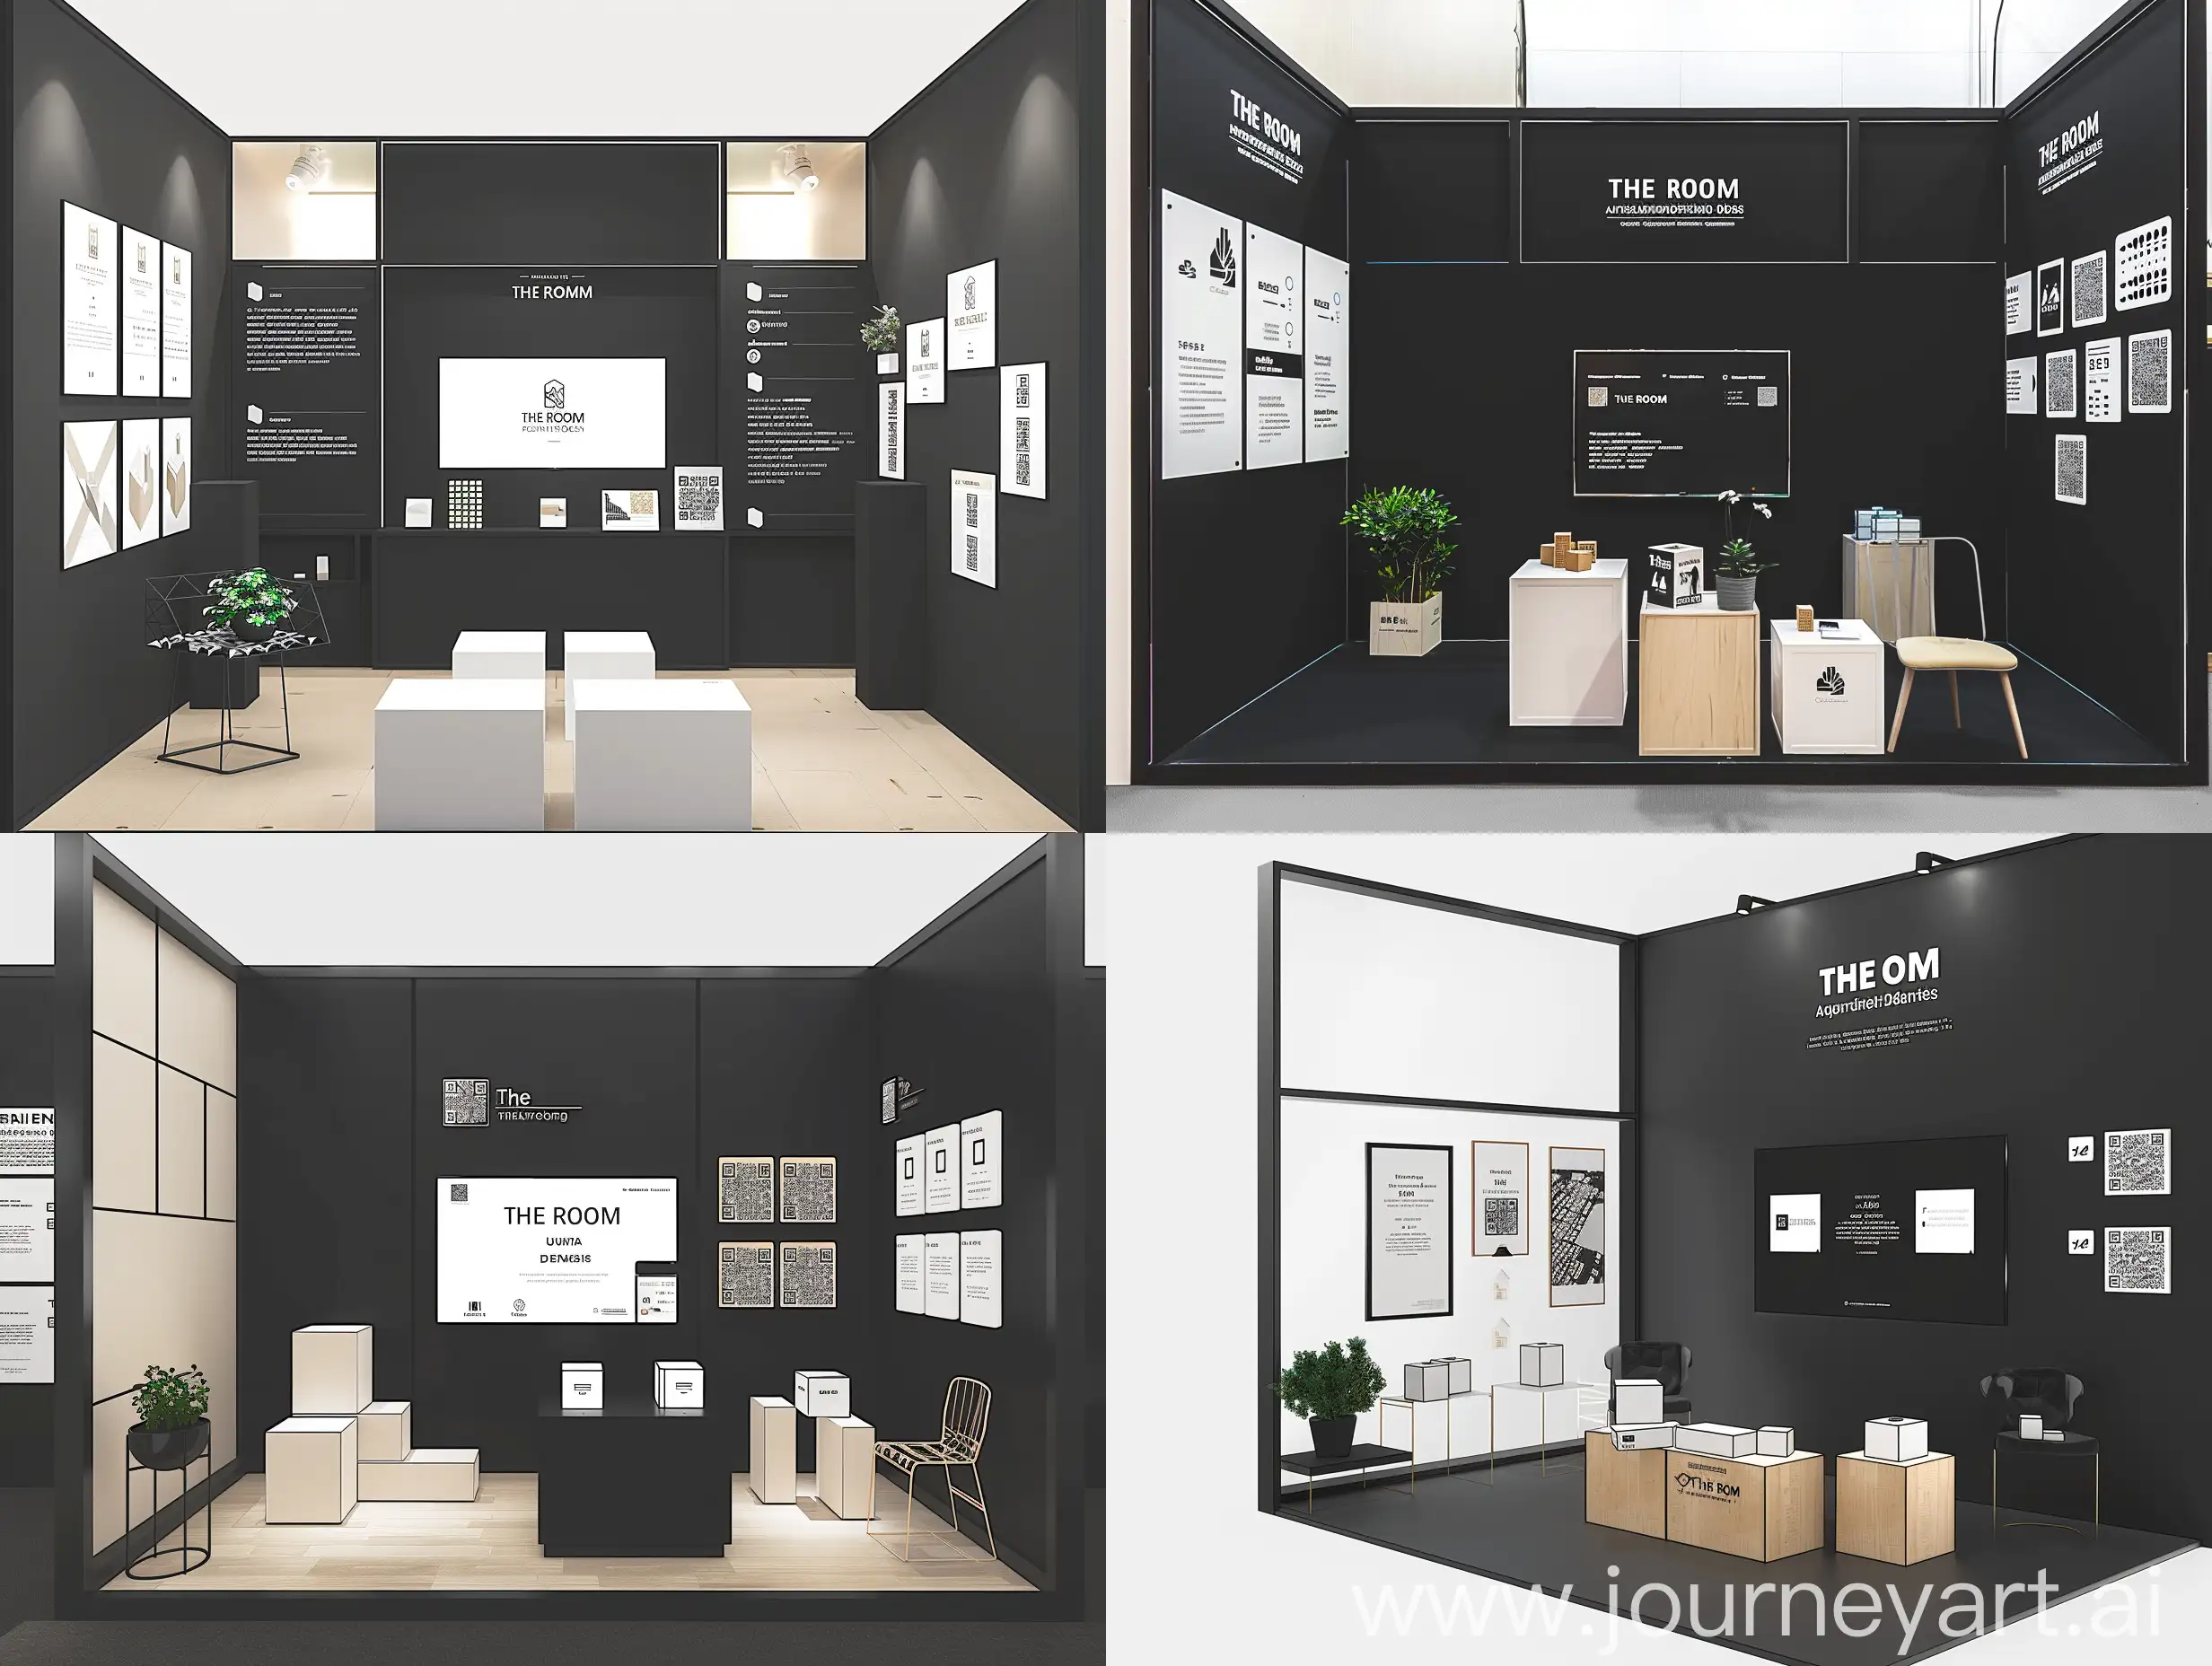 An interior design booth, black-white-warm mood tone, modern design, simple, artistic and functional. There is black a back wall at the middle with The Room Architecture and Design logo and smart TV showing the company architectural design service. the right side back wall shows QR codes with some steps to download a VR models. the left side is black frame with company postures hanging, 2 chairs with planter pot. At the front, there are 3 modular box with architectural physical models, small qr codes cubes, and architectural games. 